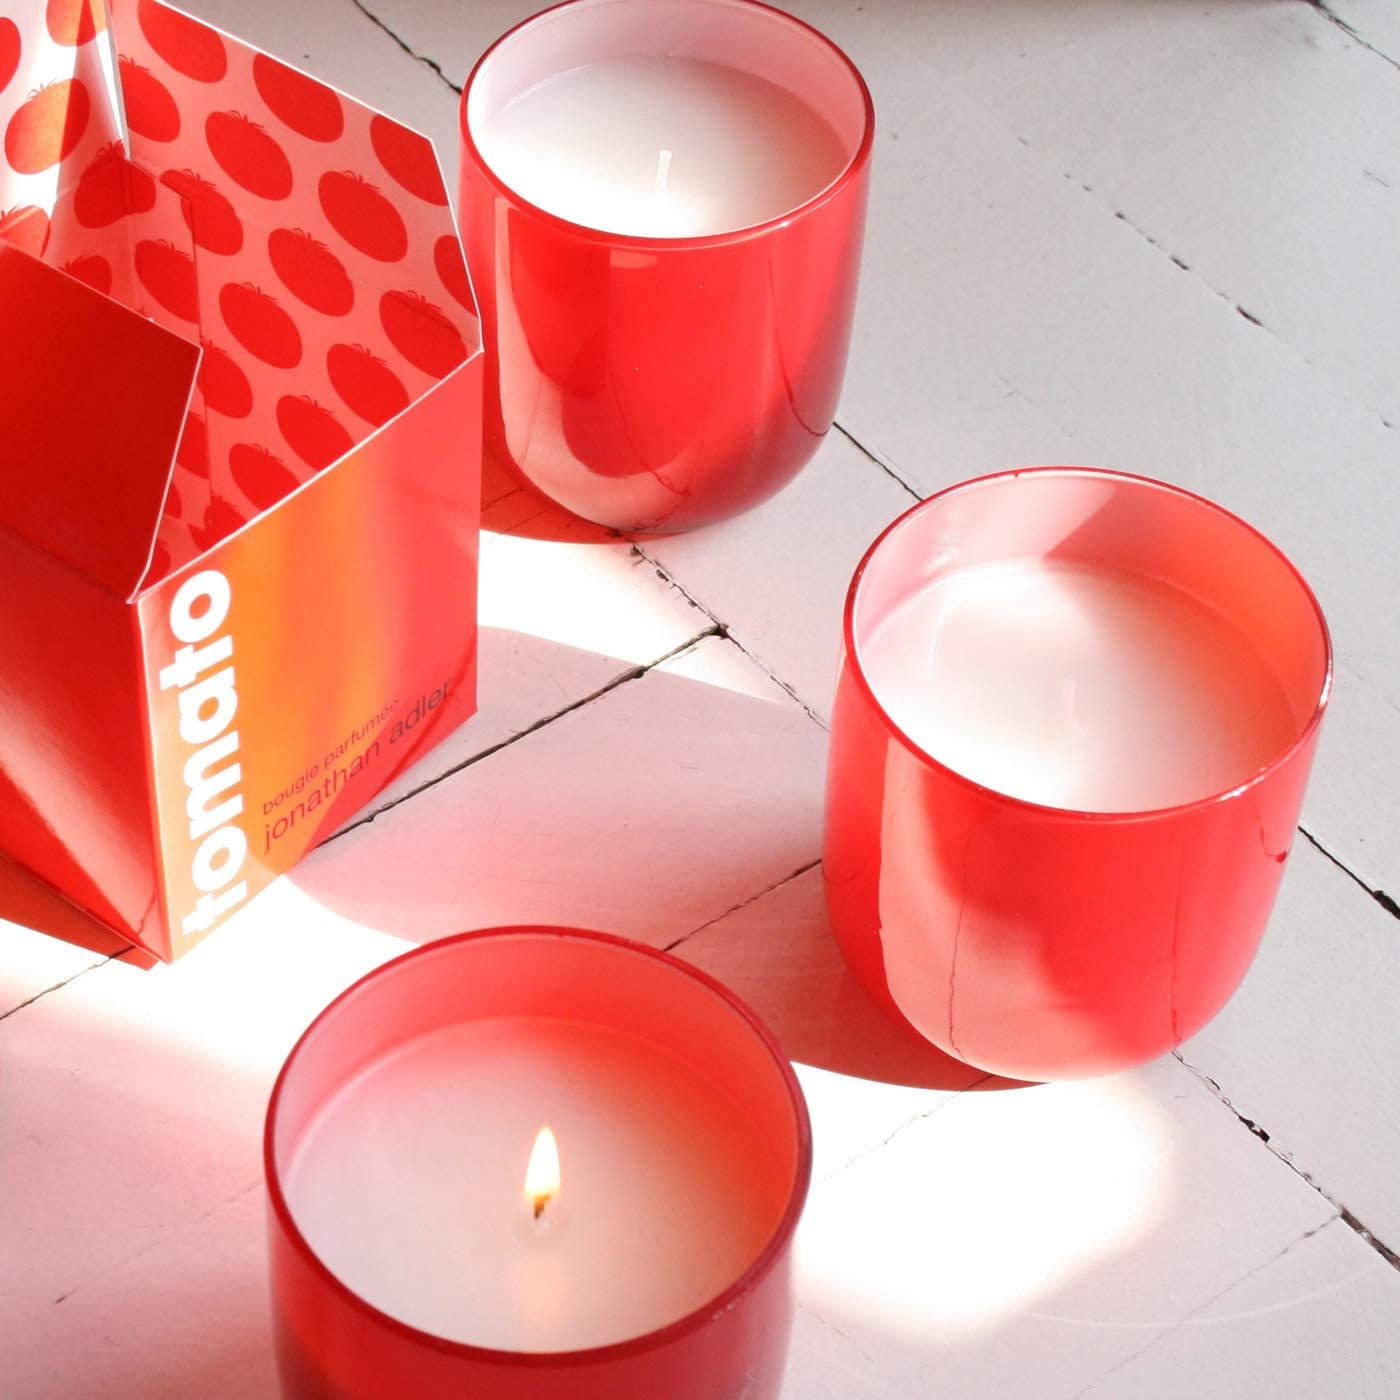 Vine Ripe Tomatoes 4oz Candle  Only the Best Candles – Only The Best  Candles